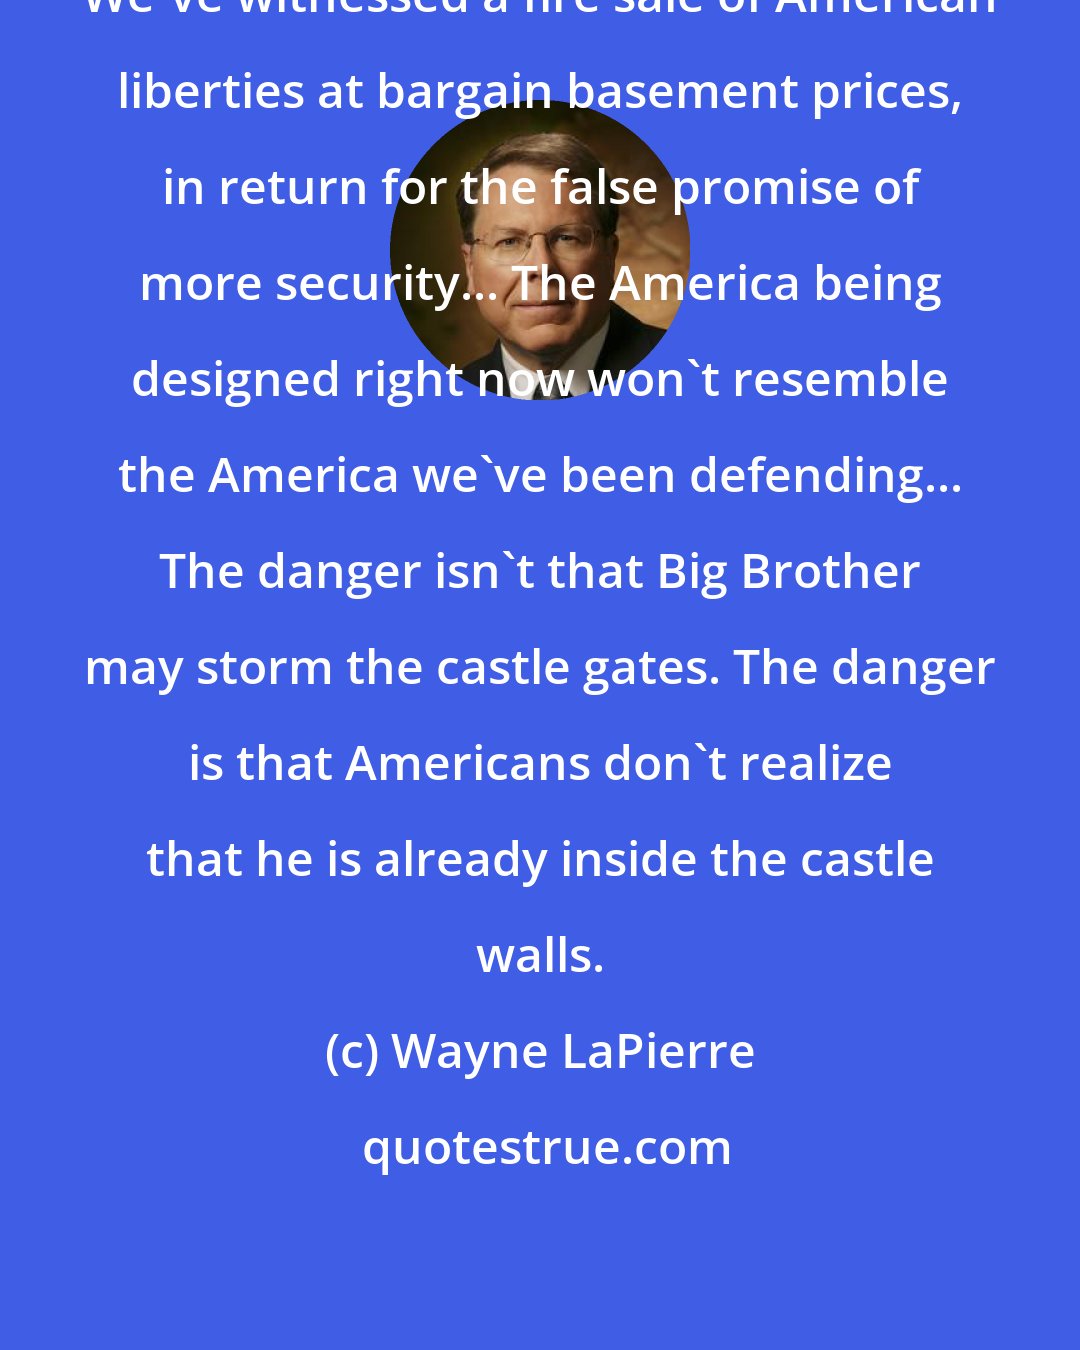 Wayne LaPierre: We've witnessed a fire sale of American liberties at bargain basement prices, in return for the false promise of more security... The America being designed right now won't resemble the America we've been defending... The danger isn't that Big Brother may storm the castle gates. The danger is that Americans don't realize that he is already inside the castle walls.